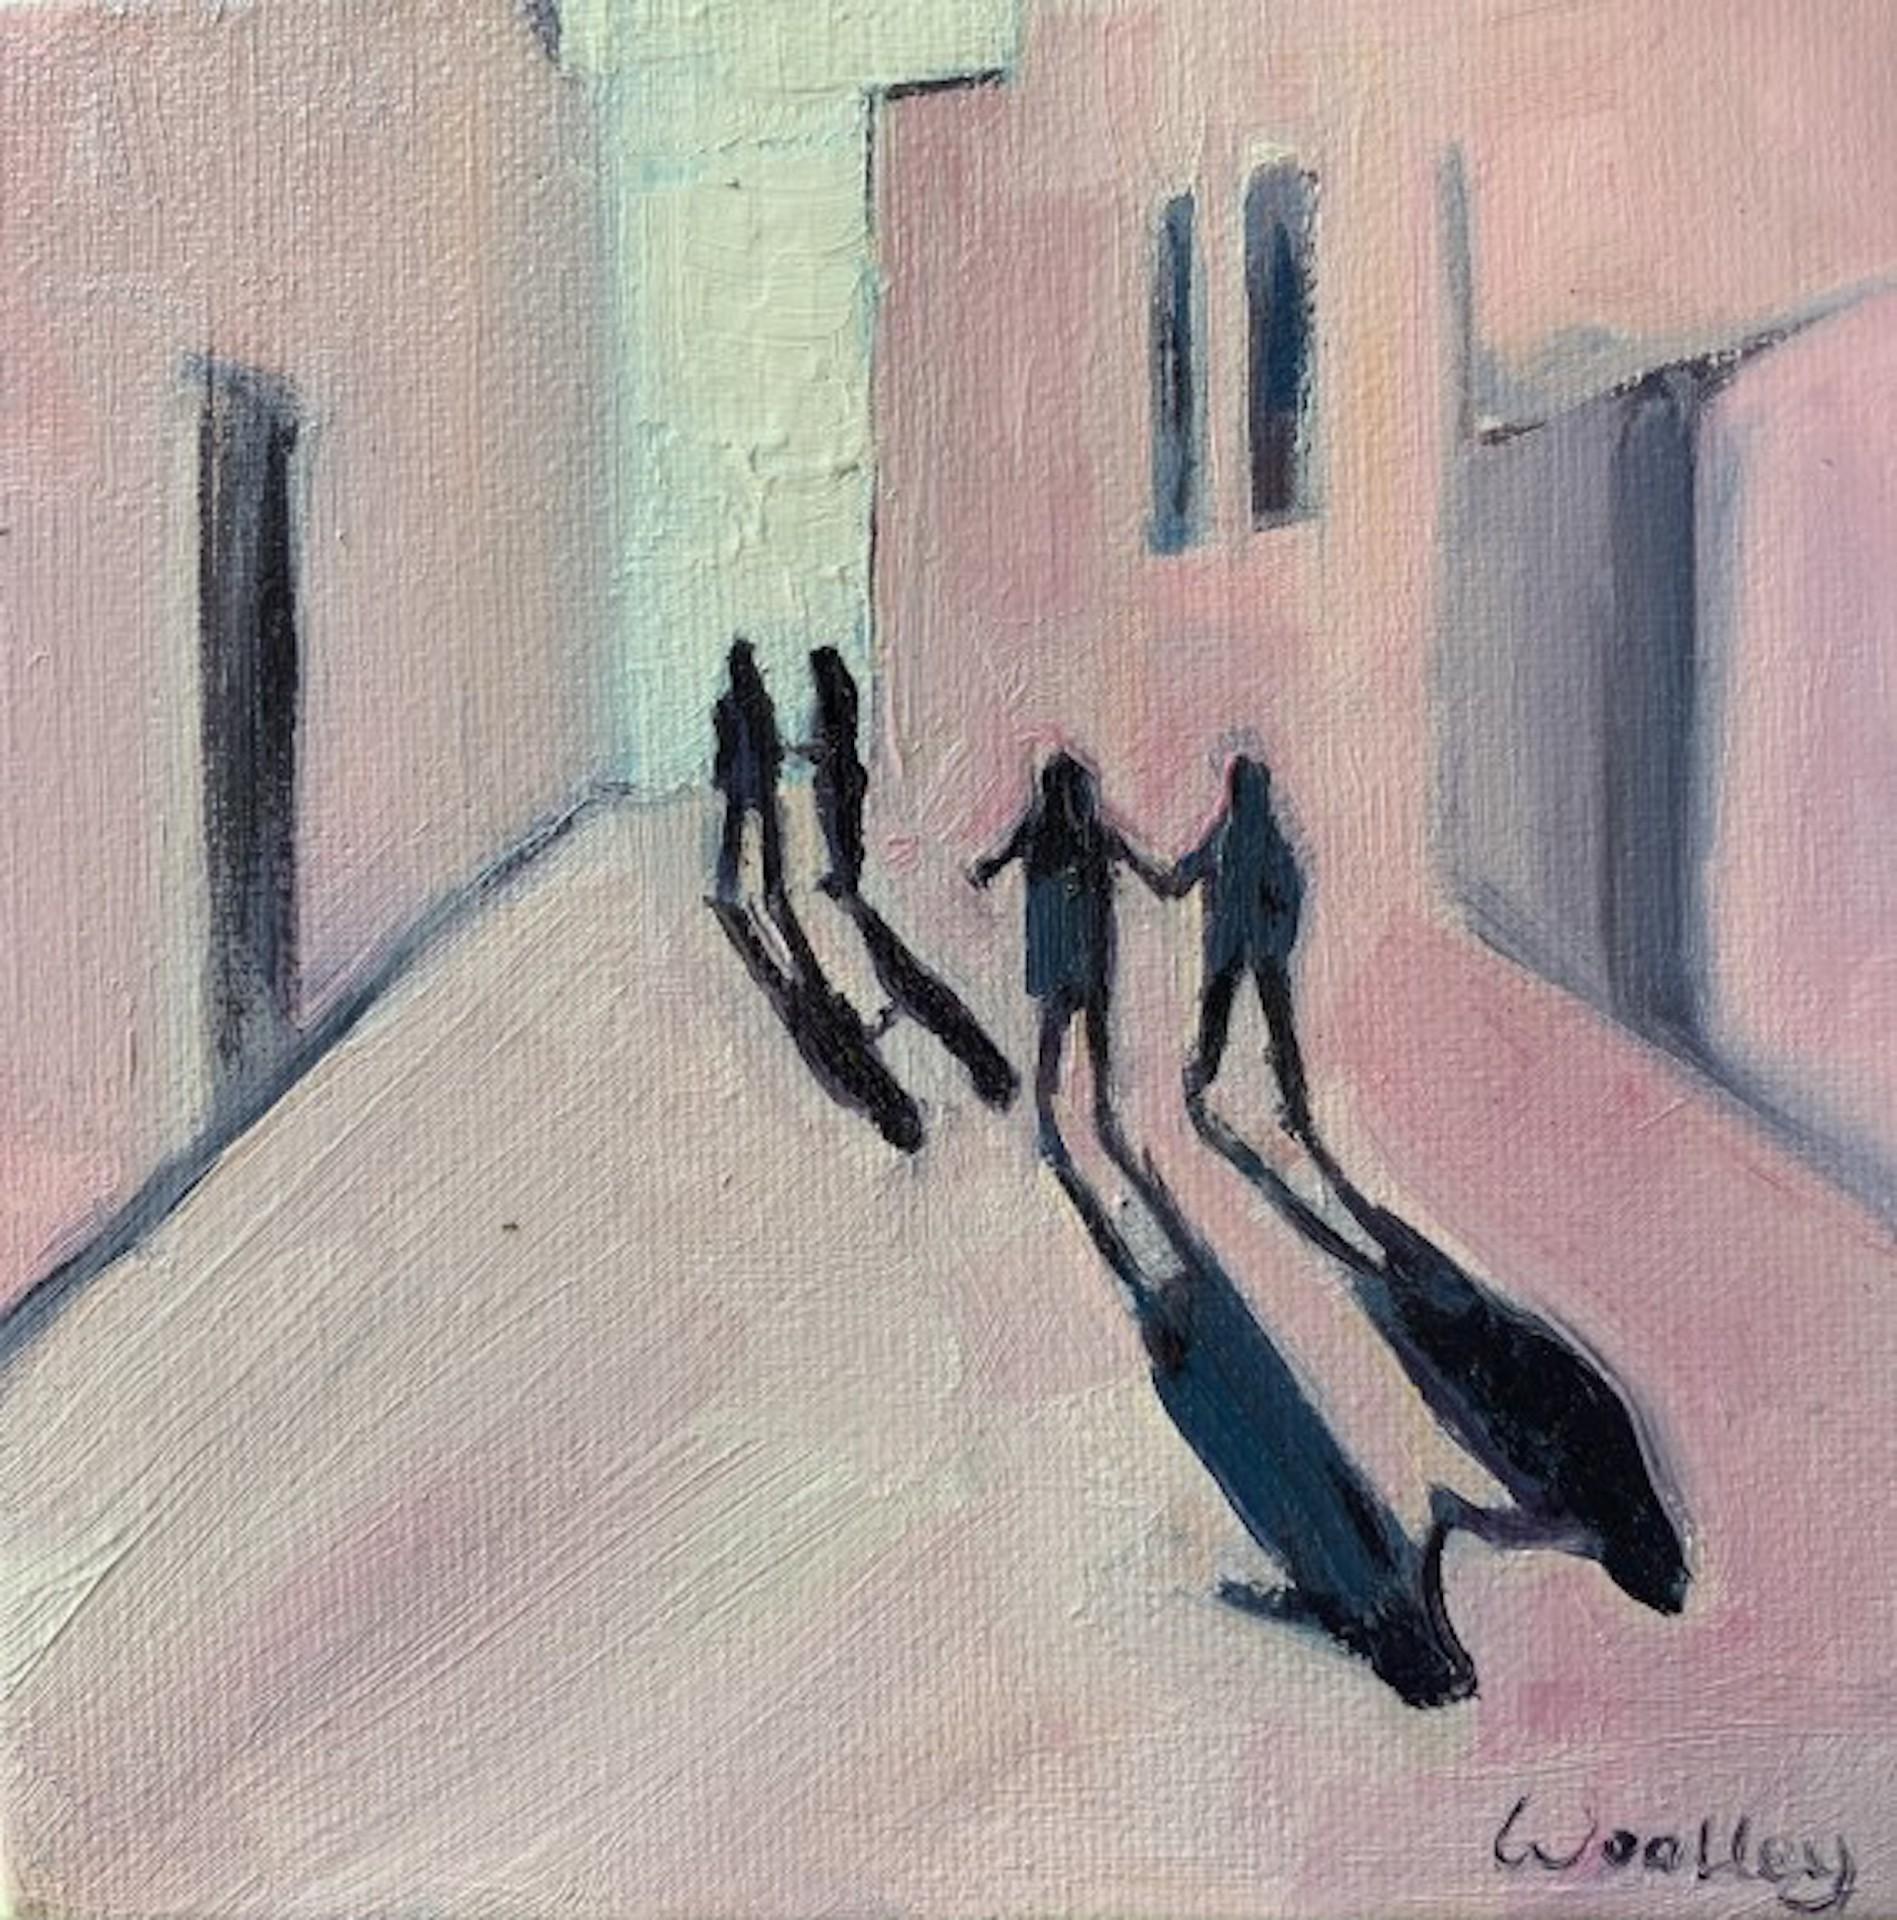 Winter Shadows 25 By Eleanor Woolley [2021]
Original
Oil paint
Image size: H:15 cm x W:15 cm
Complete Size of Unframed Work: H:15 cm x W:15 cm x D:3.5cm
Sold Unframed
Please note that insitu images are purely an indication of how a piece may